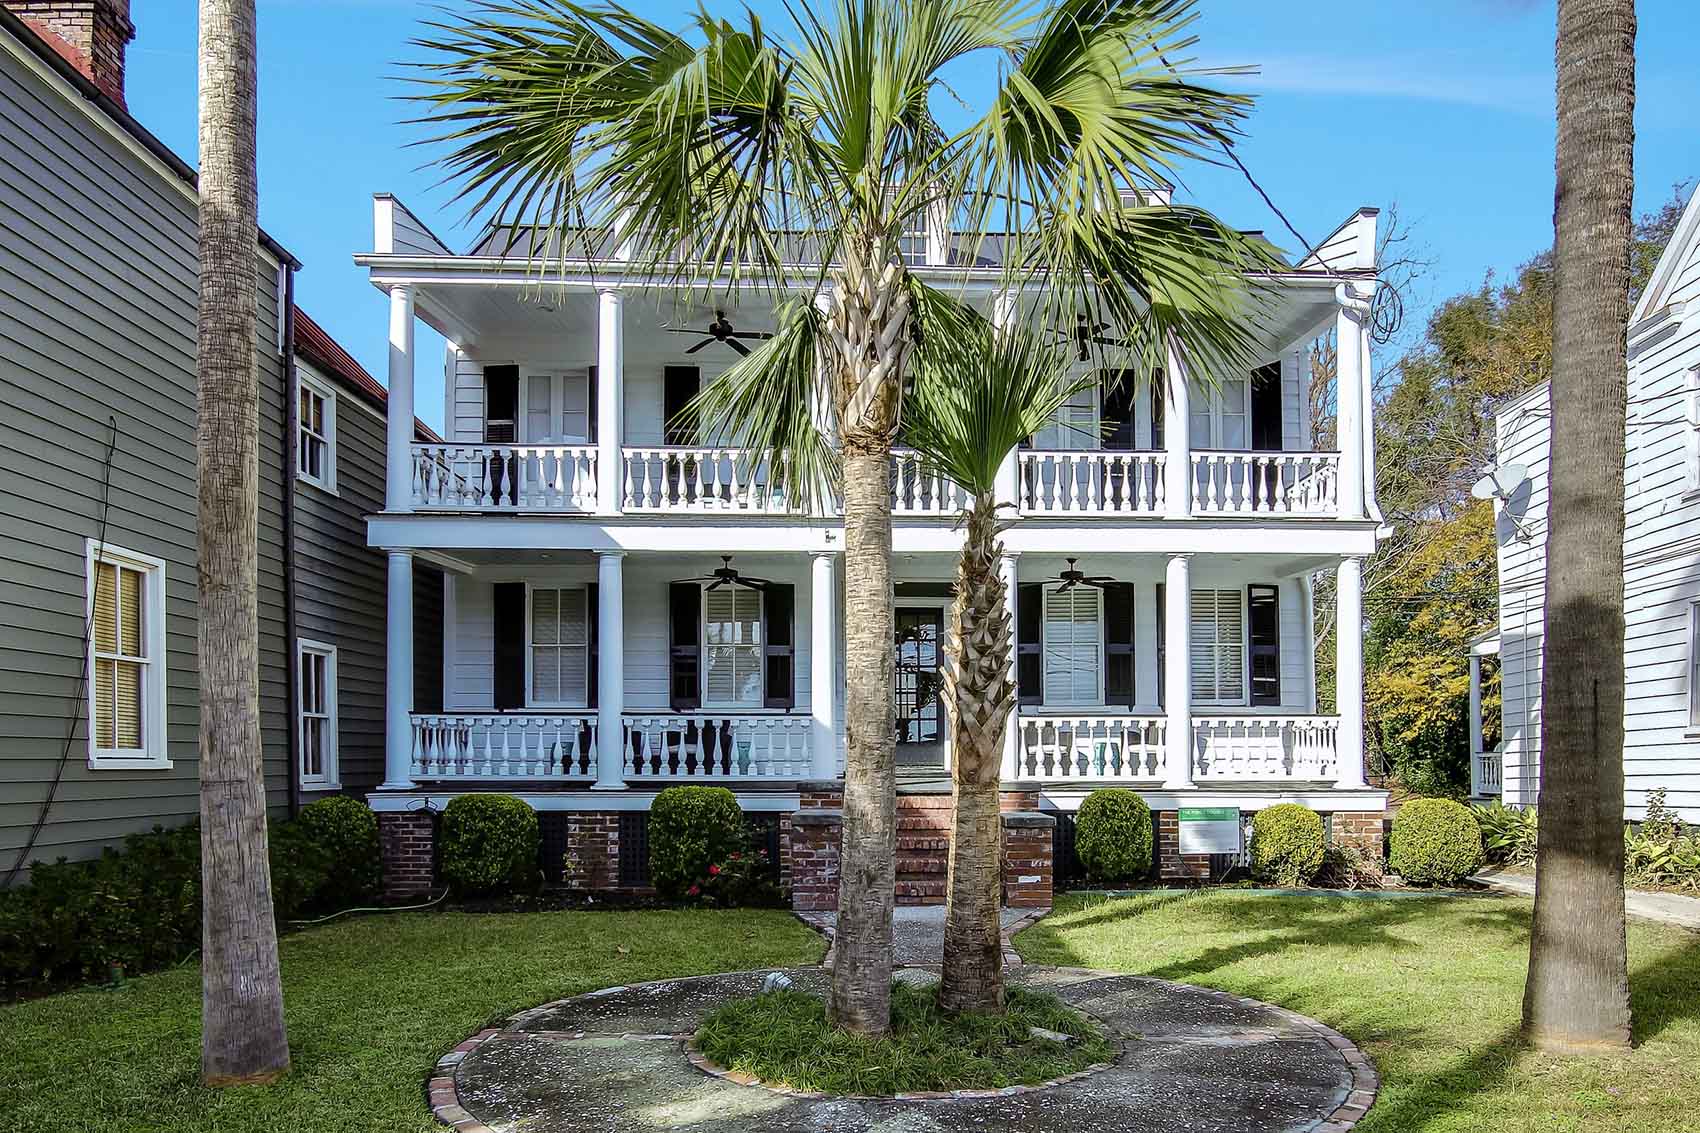 CHANGES TO SHORT-TERM RENTAL REGULATIONS CHARLESTON SC: WHAT’S AHEAD?